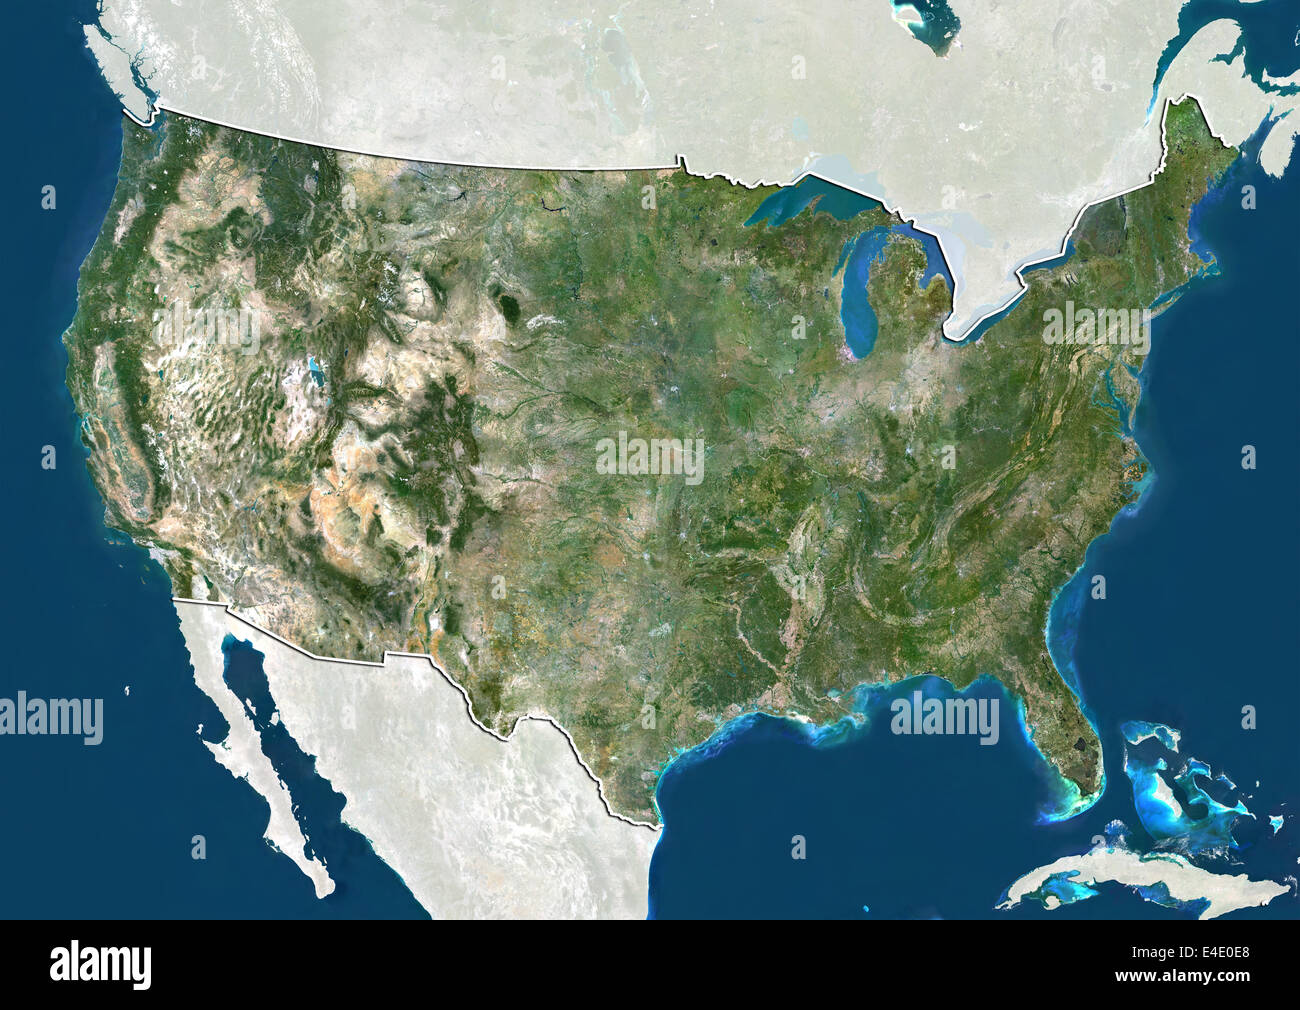 United States, True Colour Satellite Image With Border and Mask Stock Photo